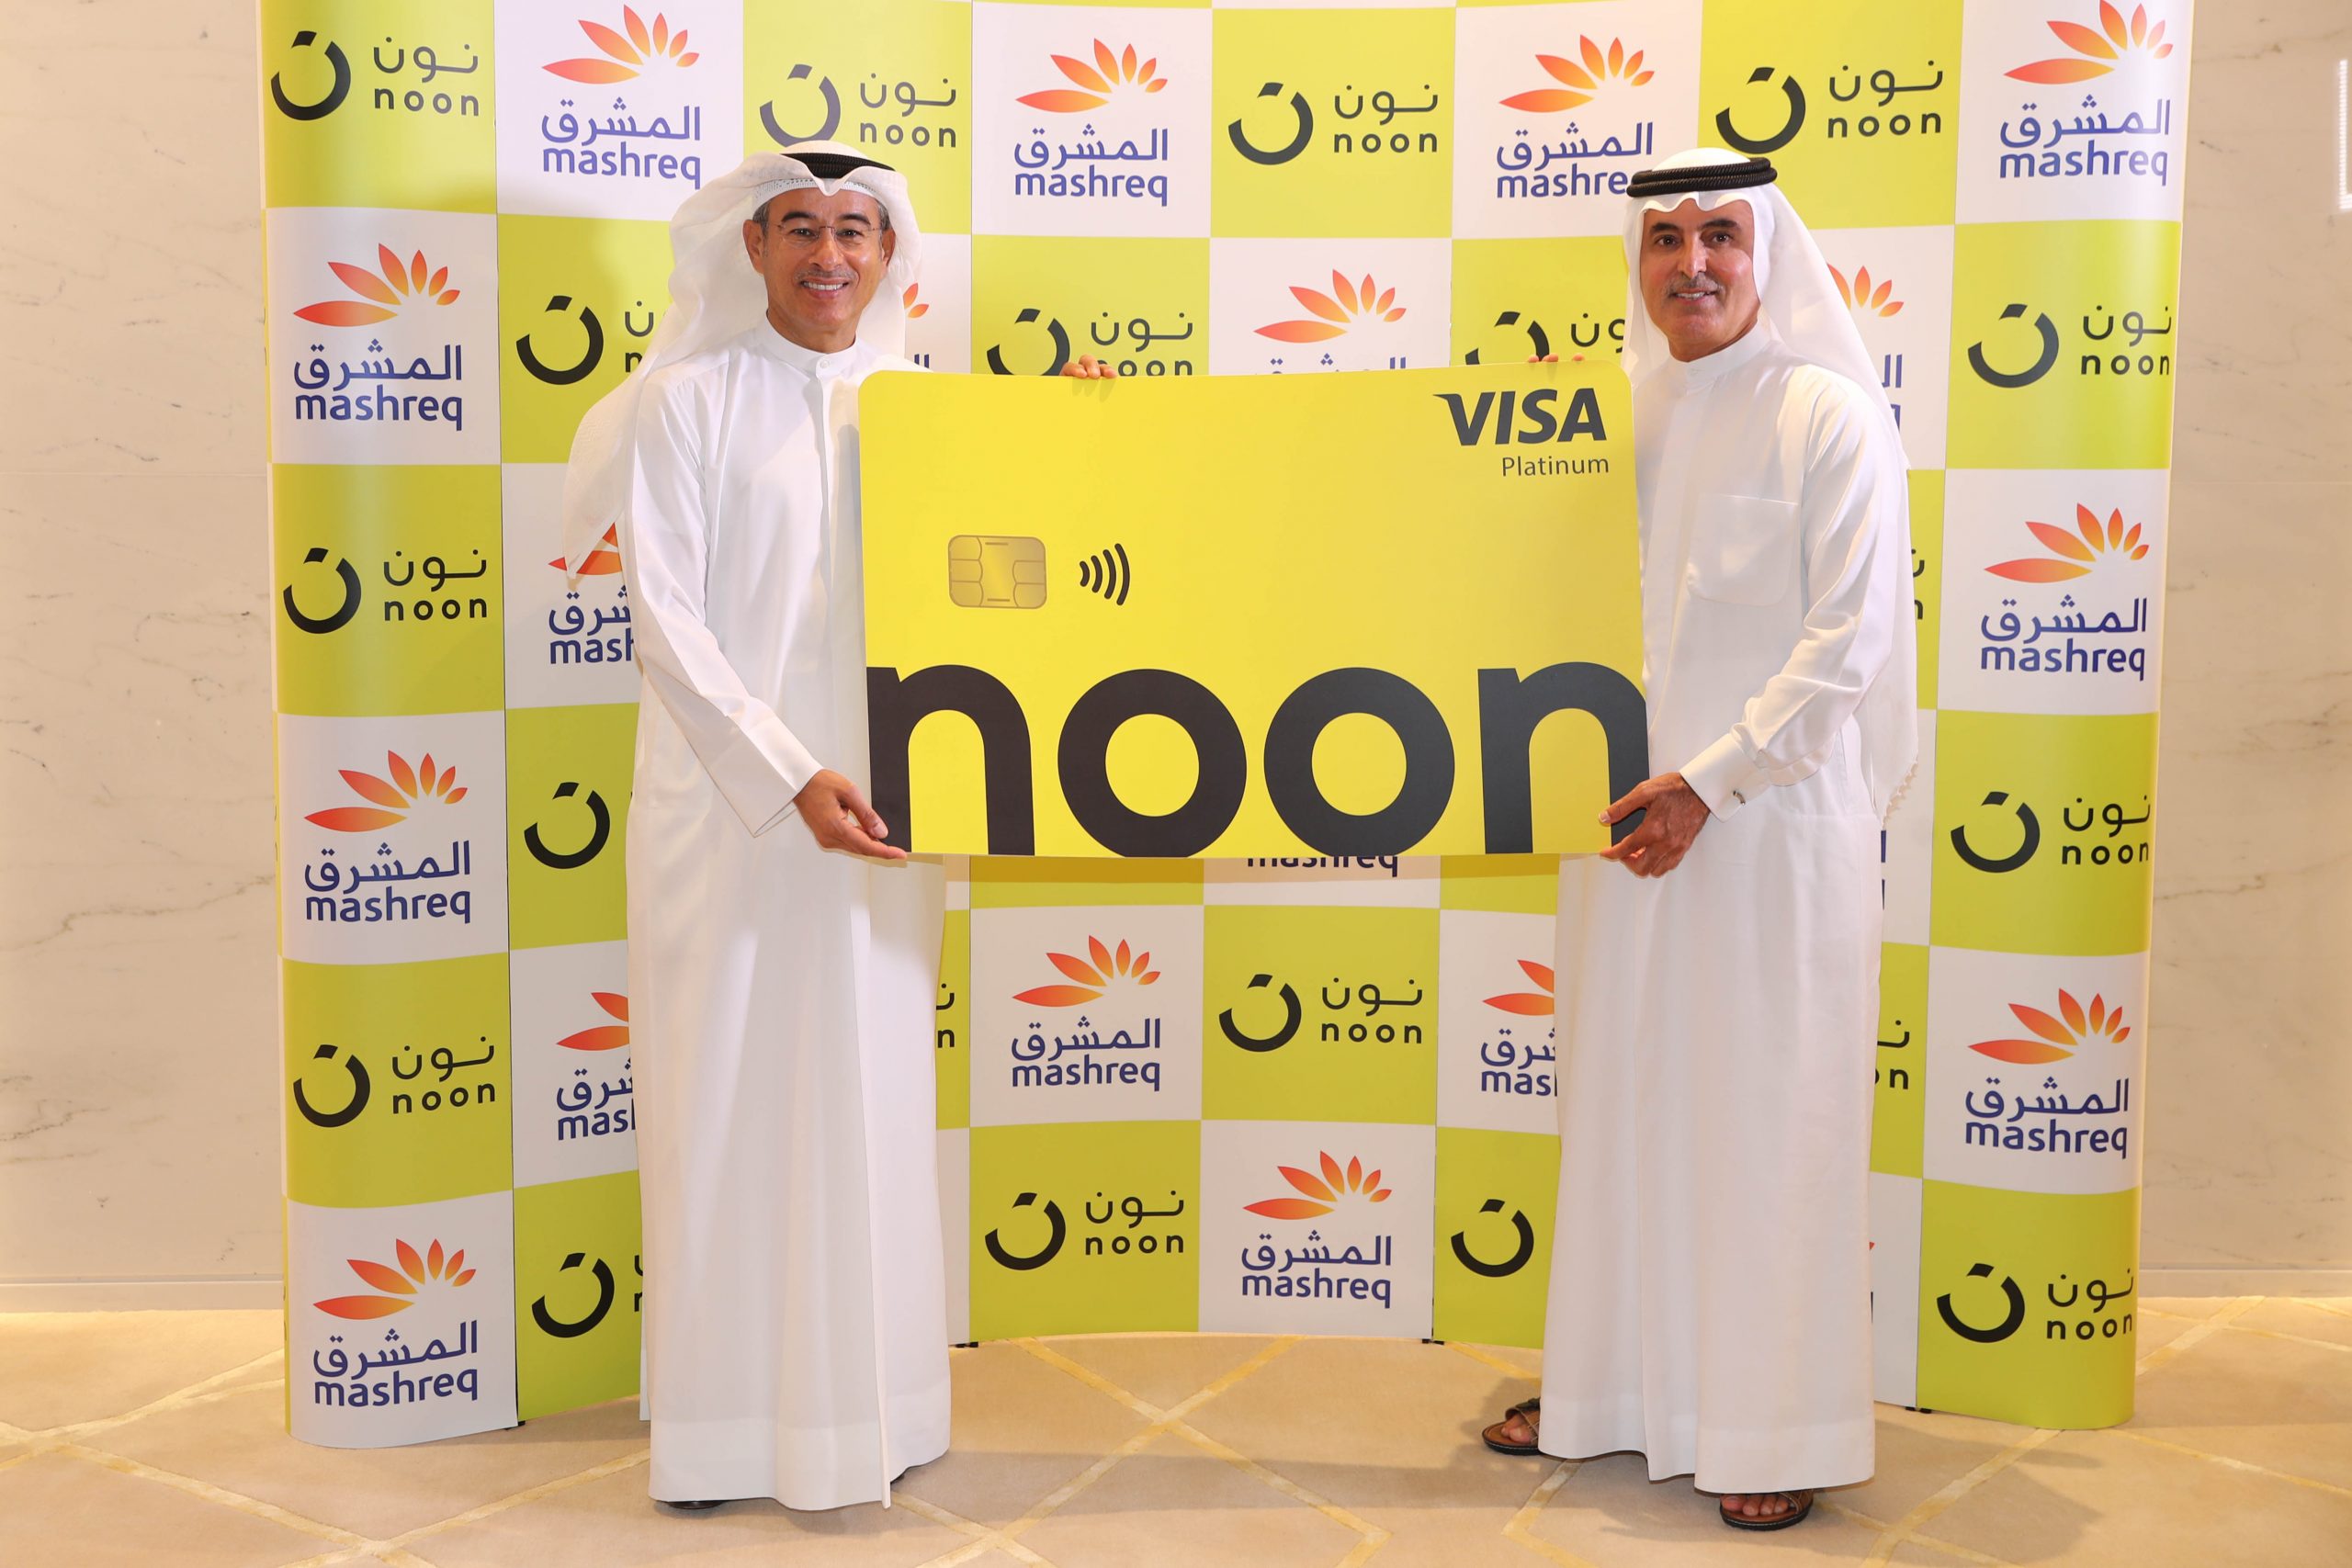 Image for Mashreq And noon.com Announce Strategic Partnership To Redefine Online Shopping For UAE Customers